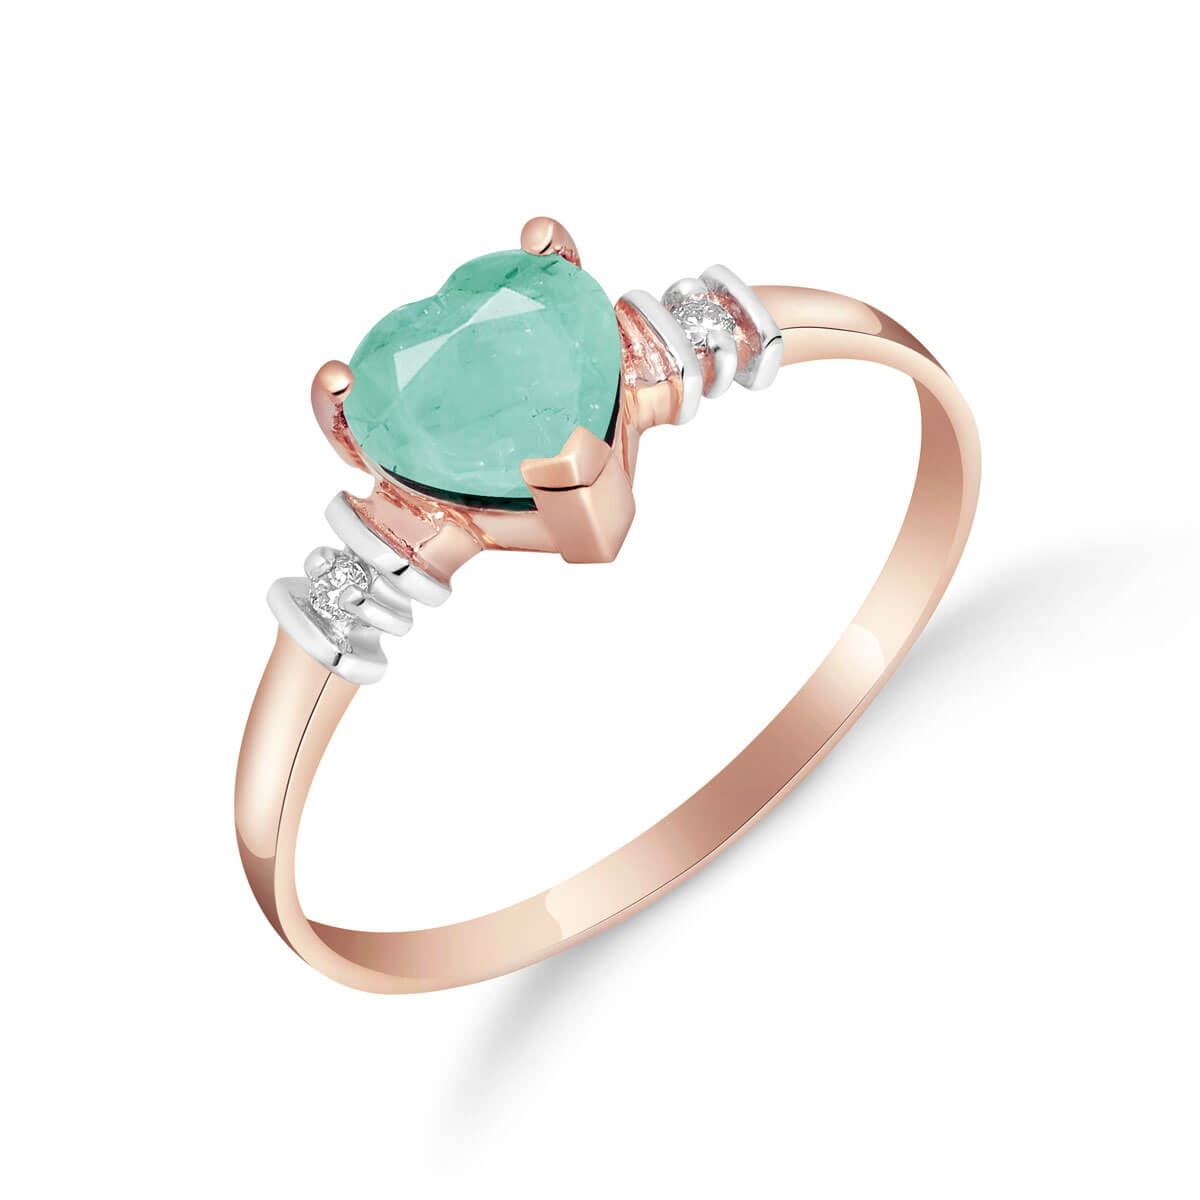 Emerald & Diamond Heart Ring in 9ct Rose Gold